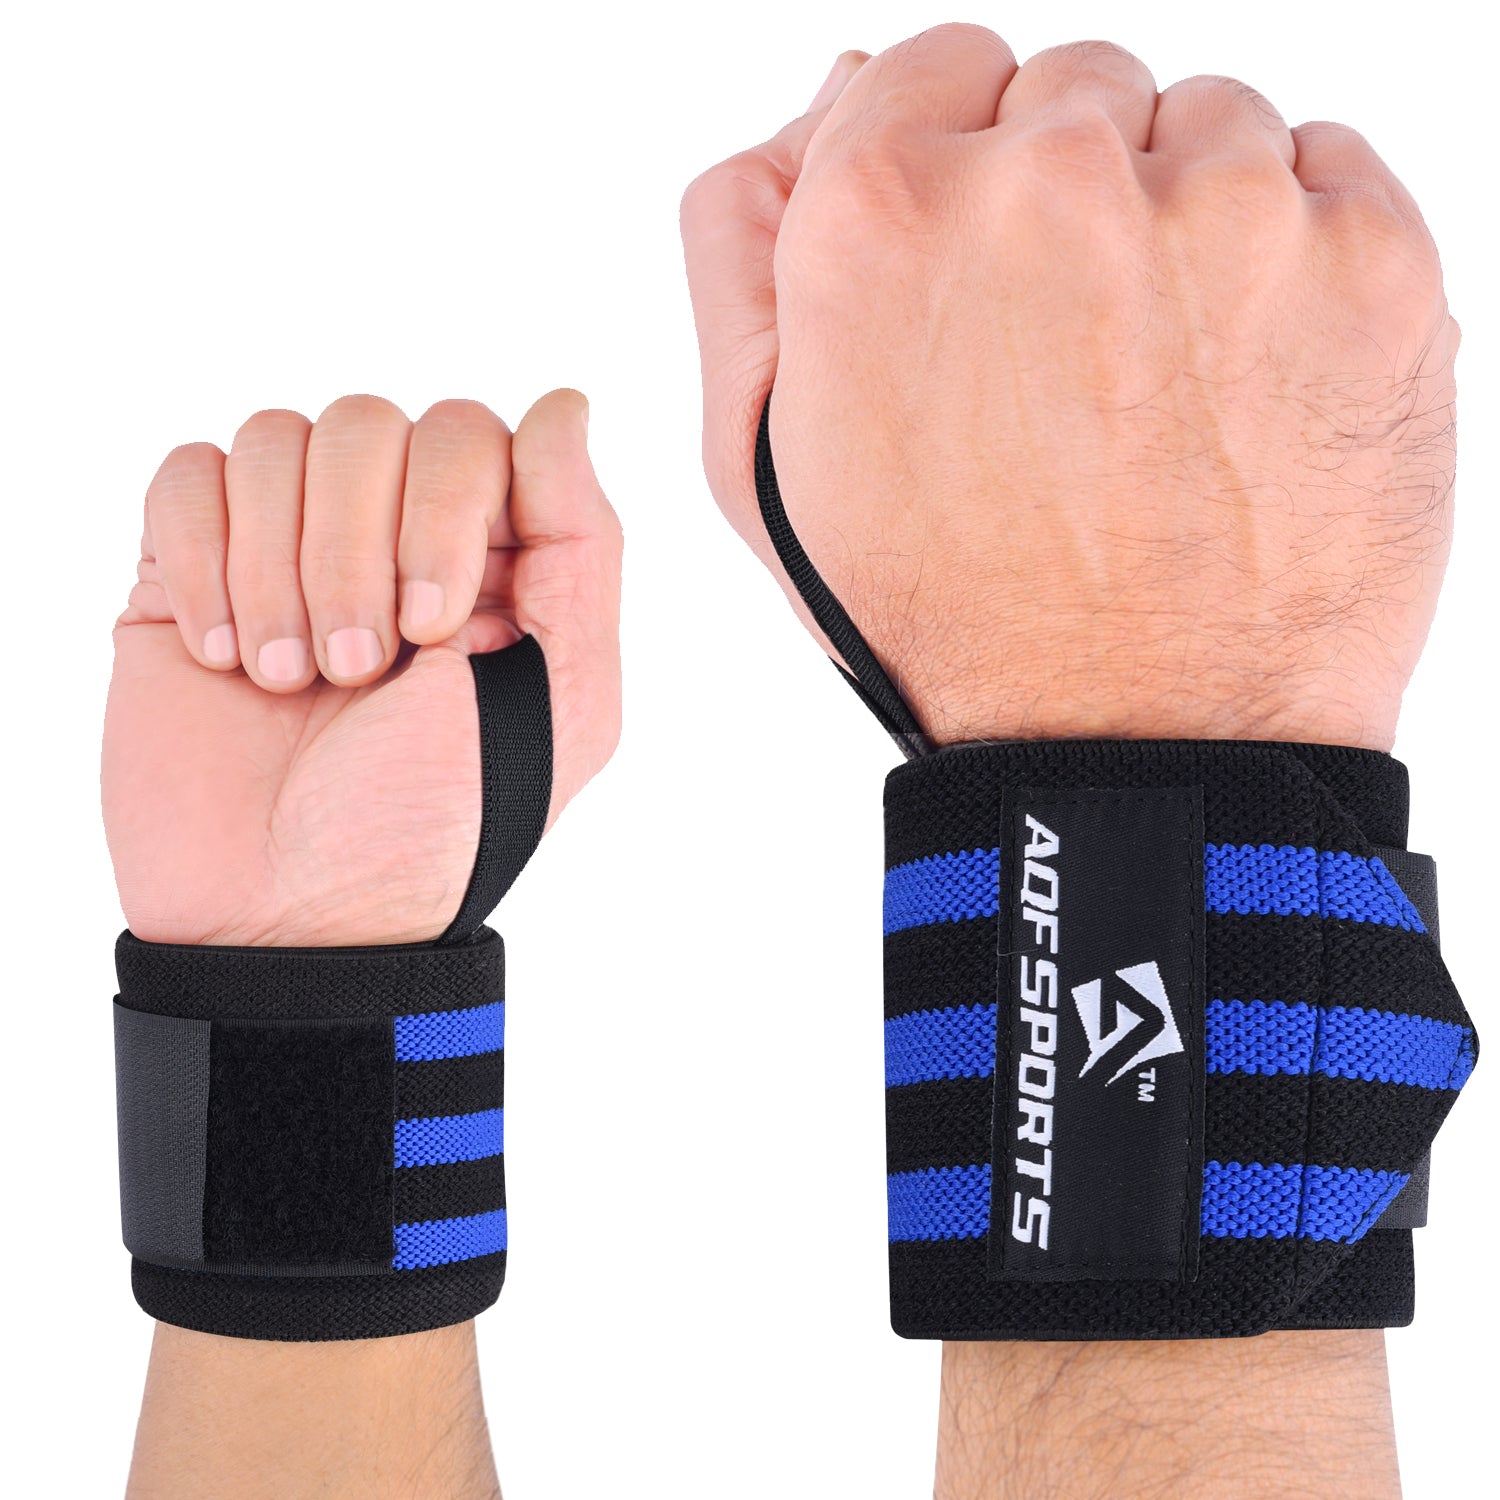 AQF 18 Power Weight Lifting Wrist Wraps - Comfortable Fit